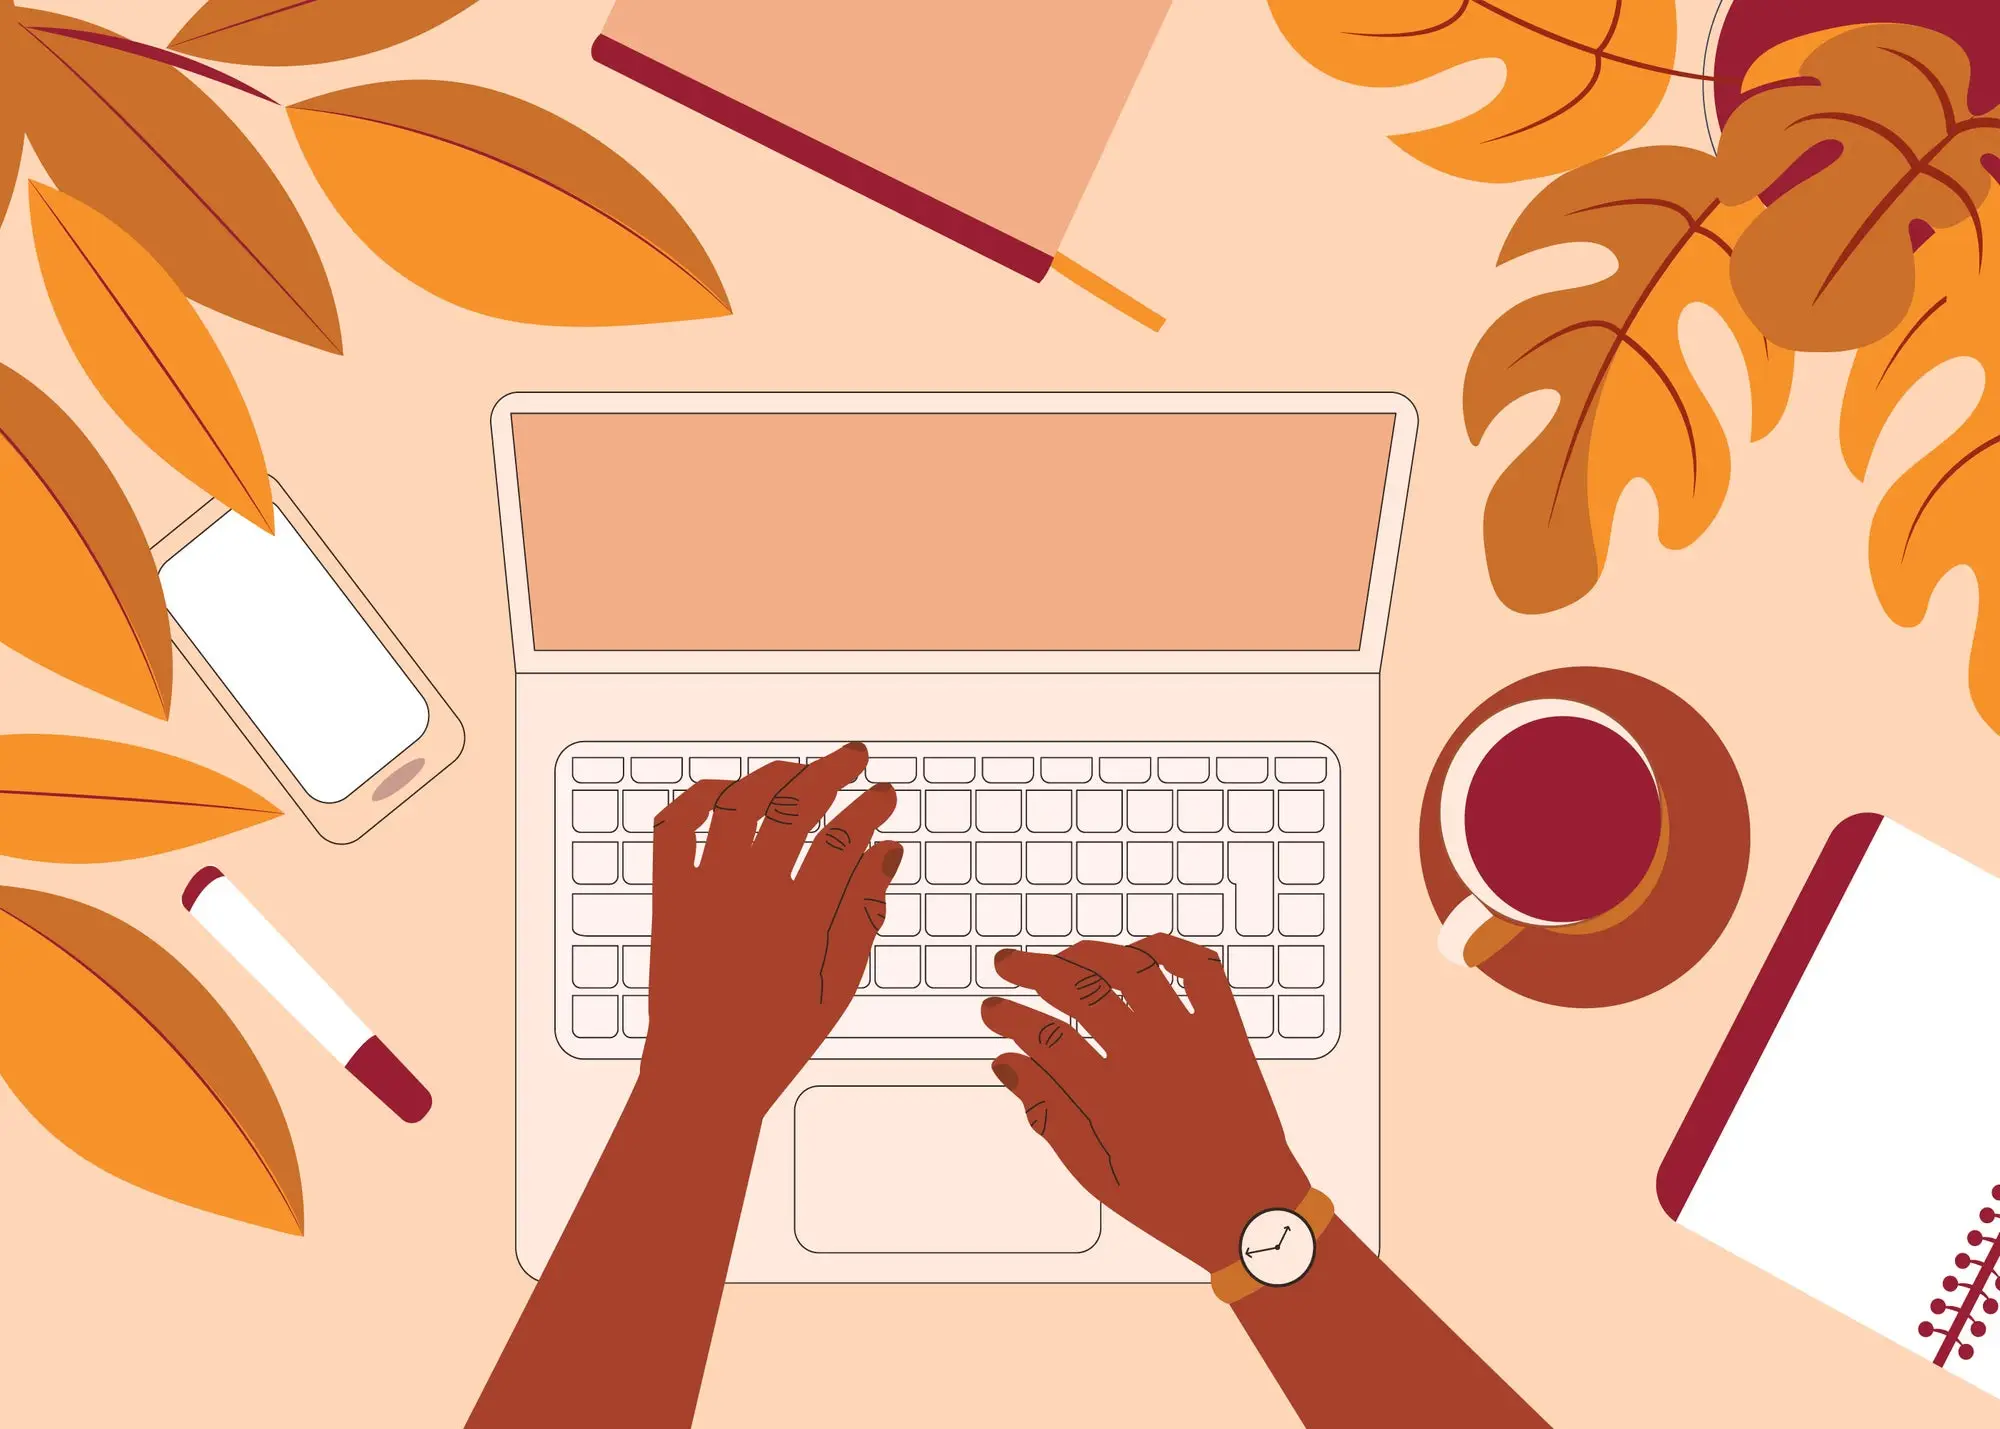 Autumn-themed birds-eye view illustration of hands typing on laptop surrounded.